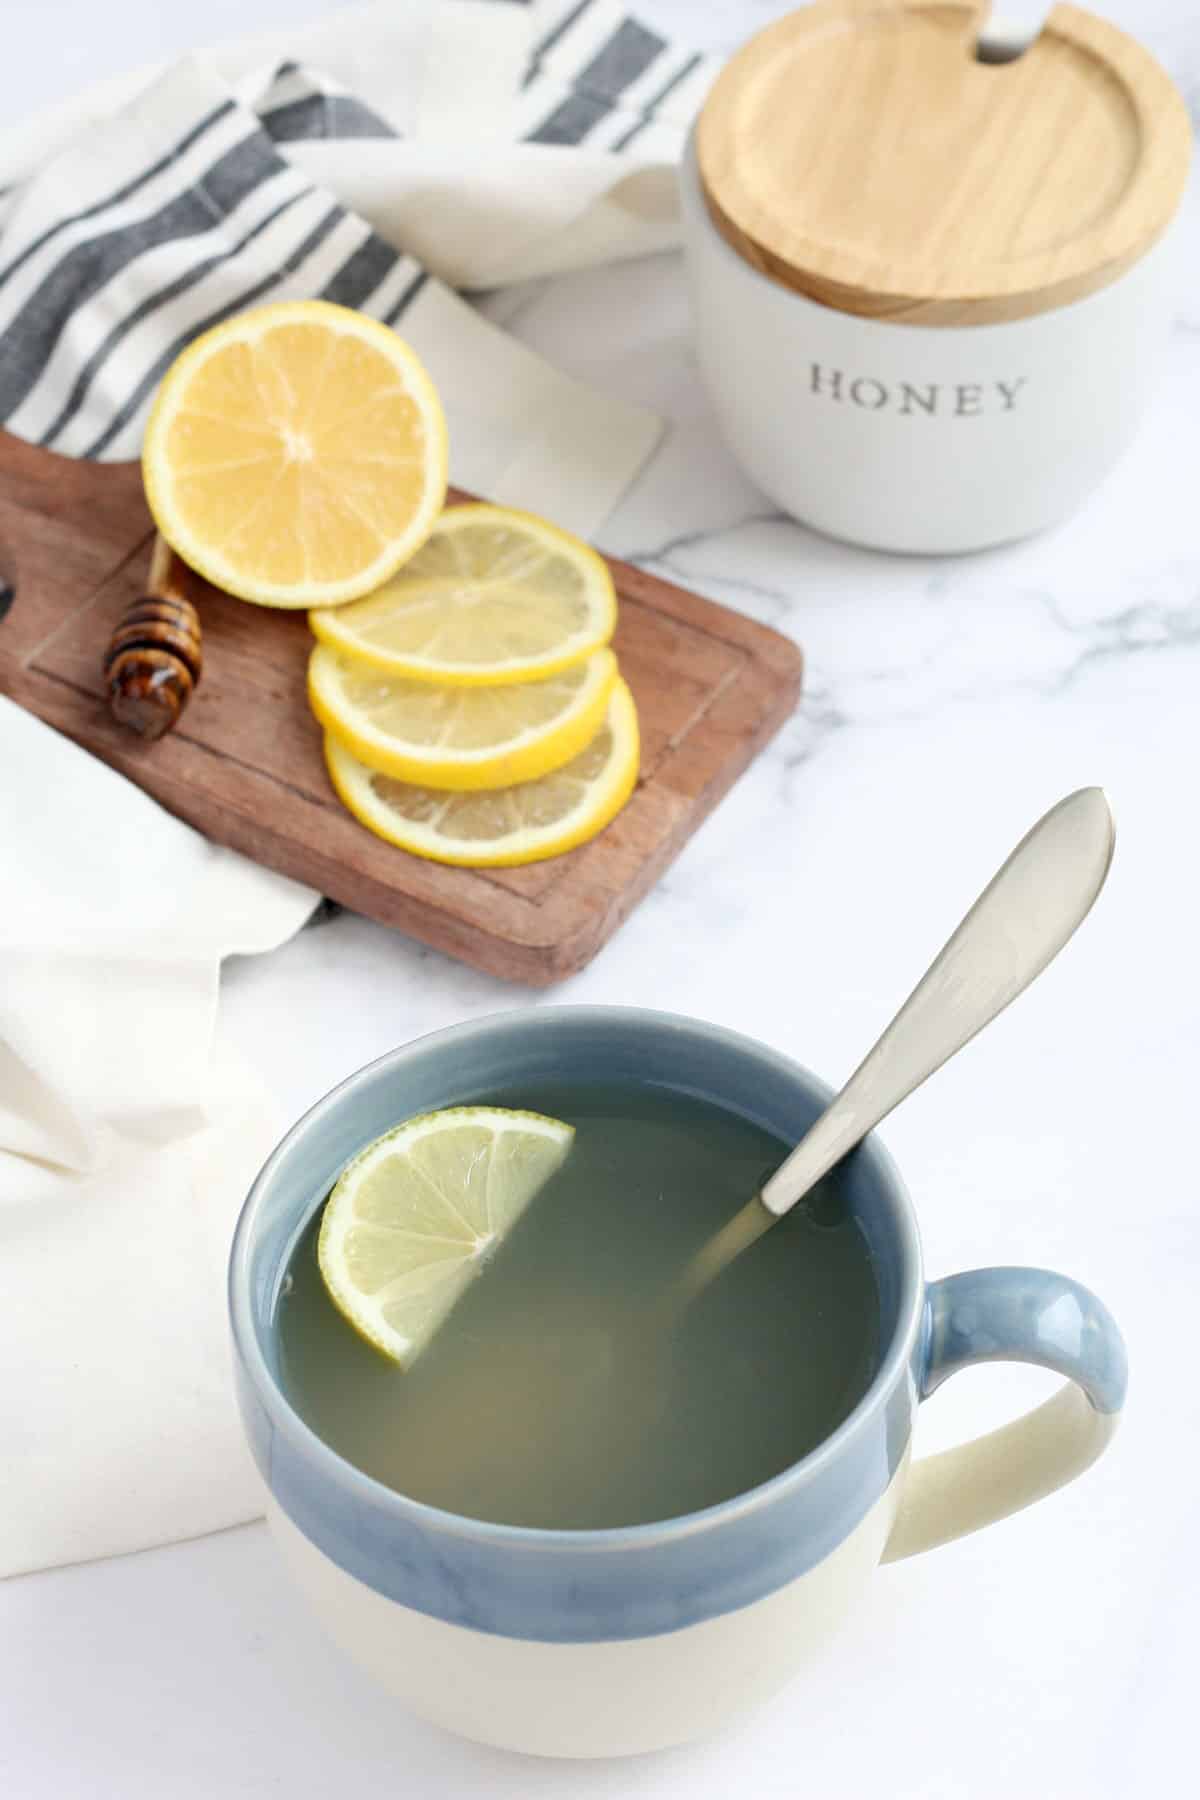 Blue mug and silver spoon with honey lemon cold medicine next to cutting board with lemon slices